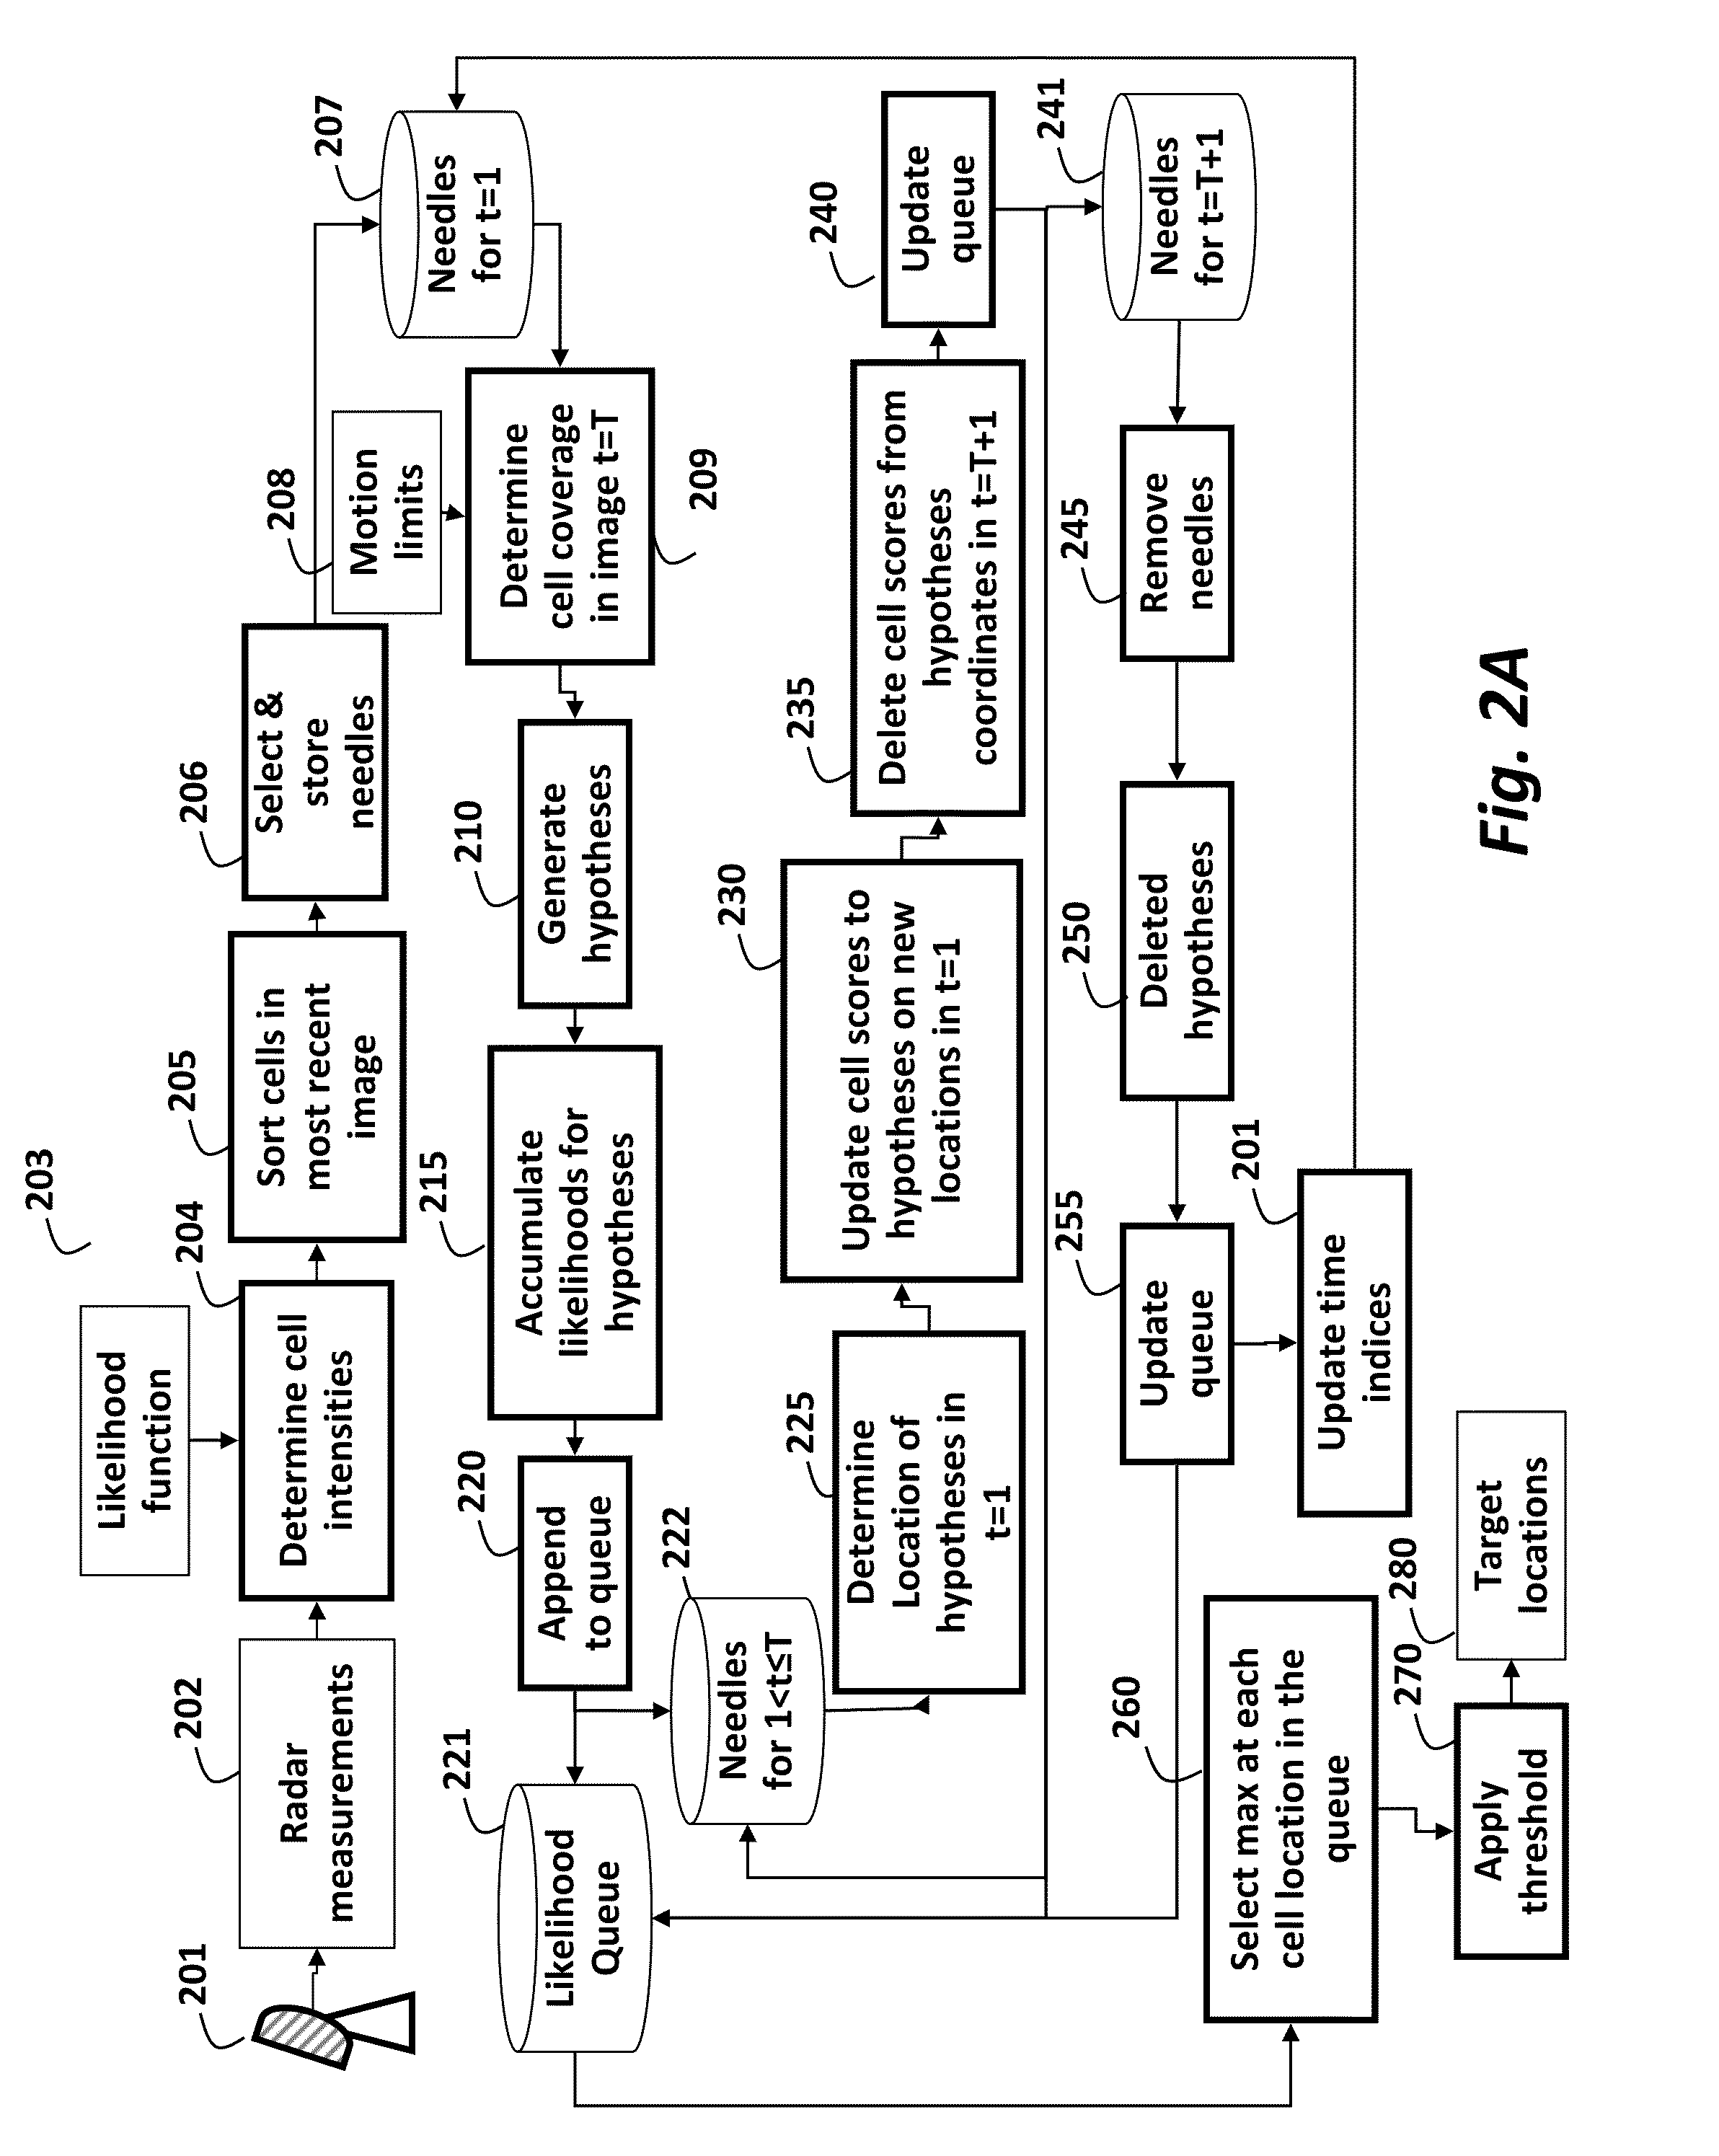 Method for Detecting Small Targets in Radar Images Using Needle Based Hypotheses Verification